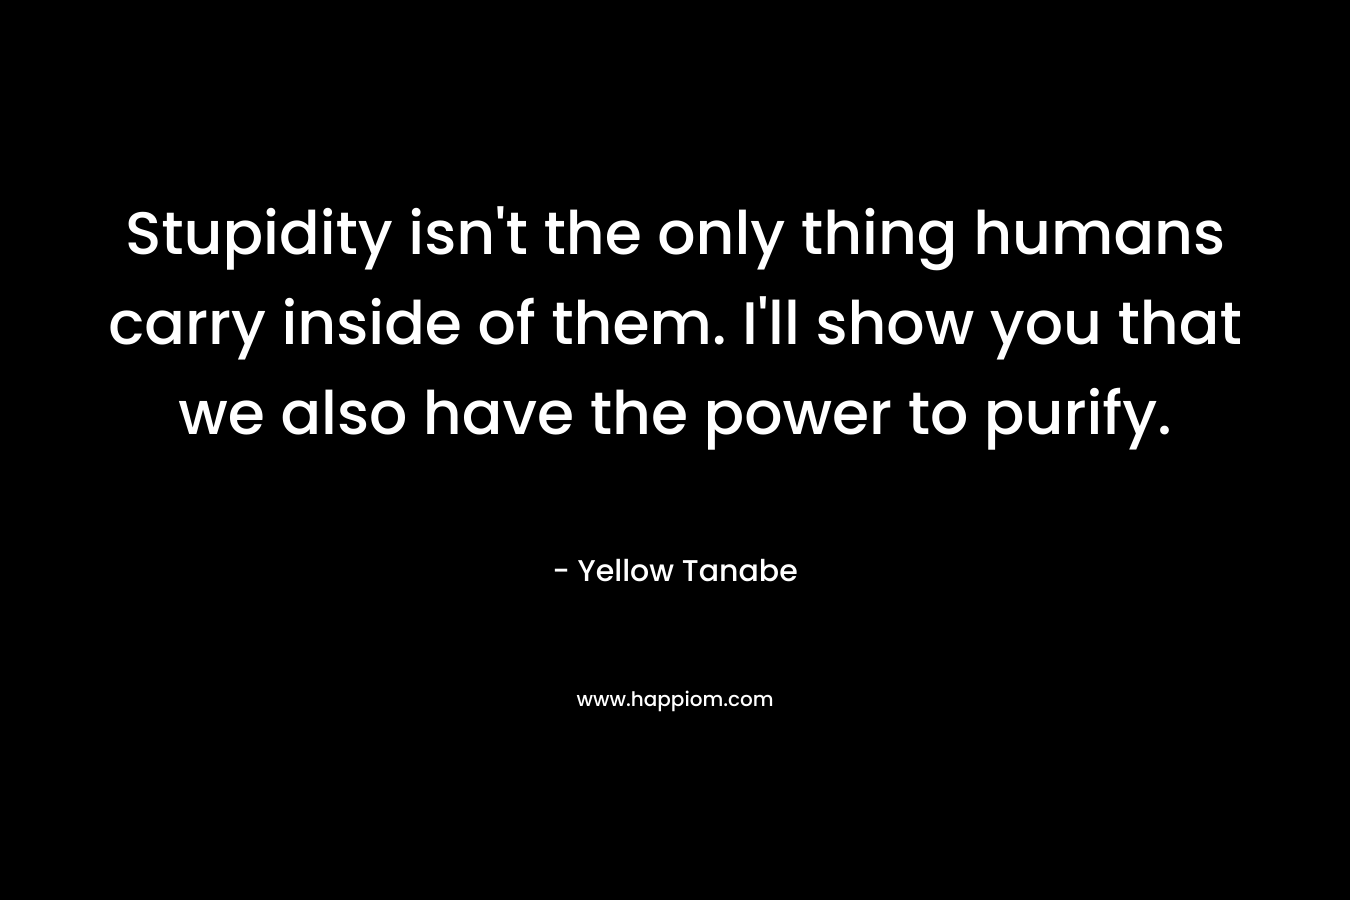 Stupidity isn’t the only thing humans carry inside of them. I’ll show you that we also have the power to purify. – Yellow Tanabe